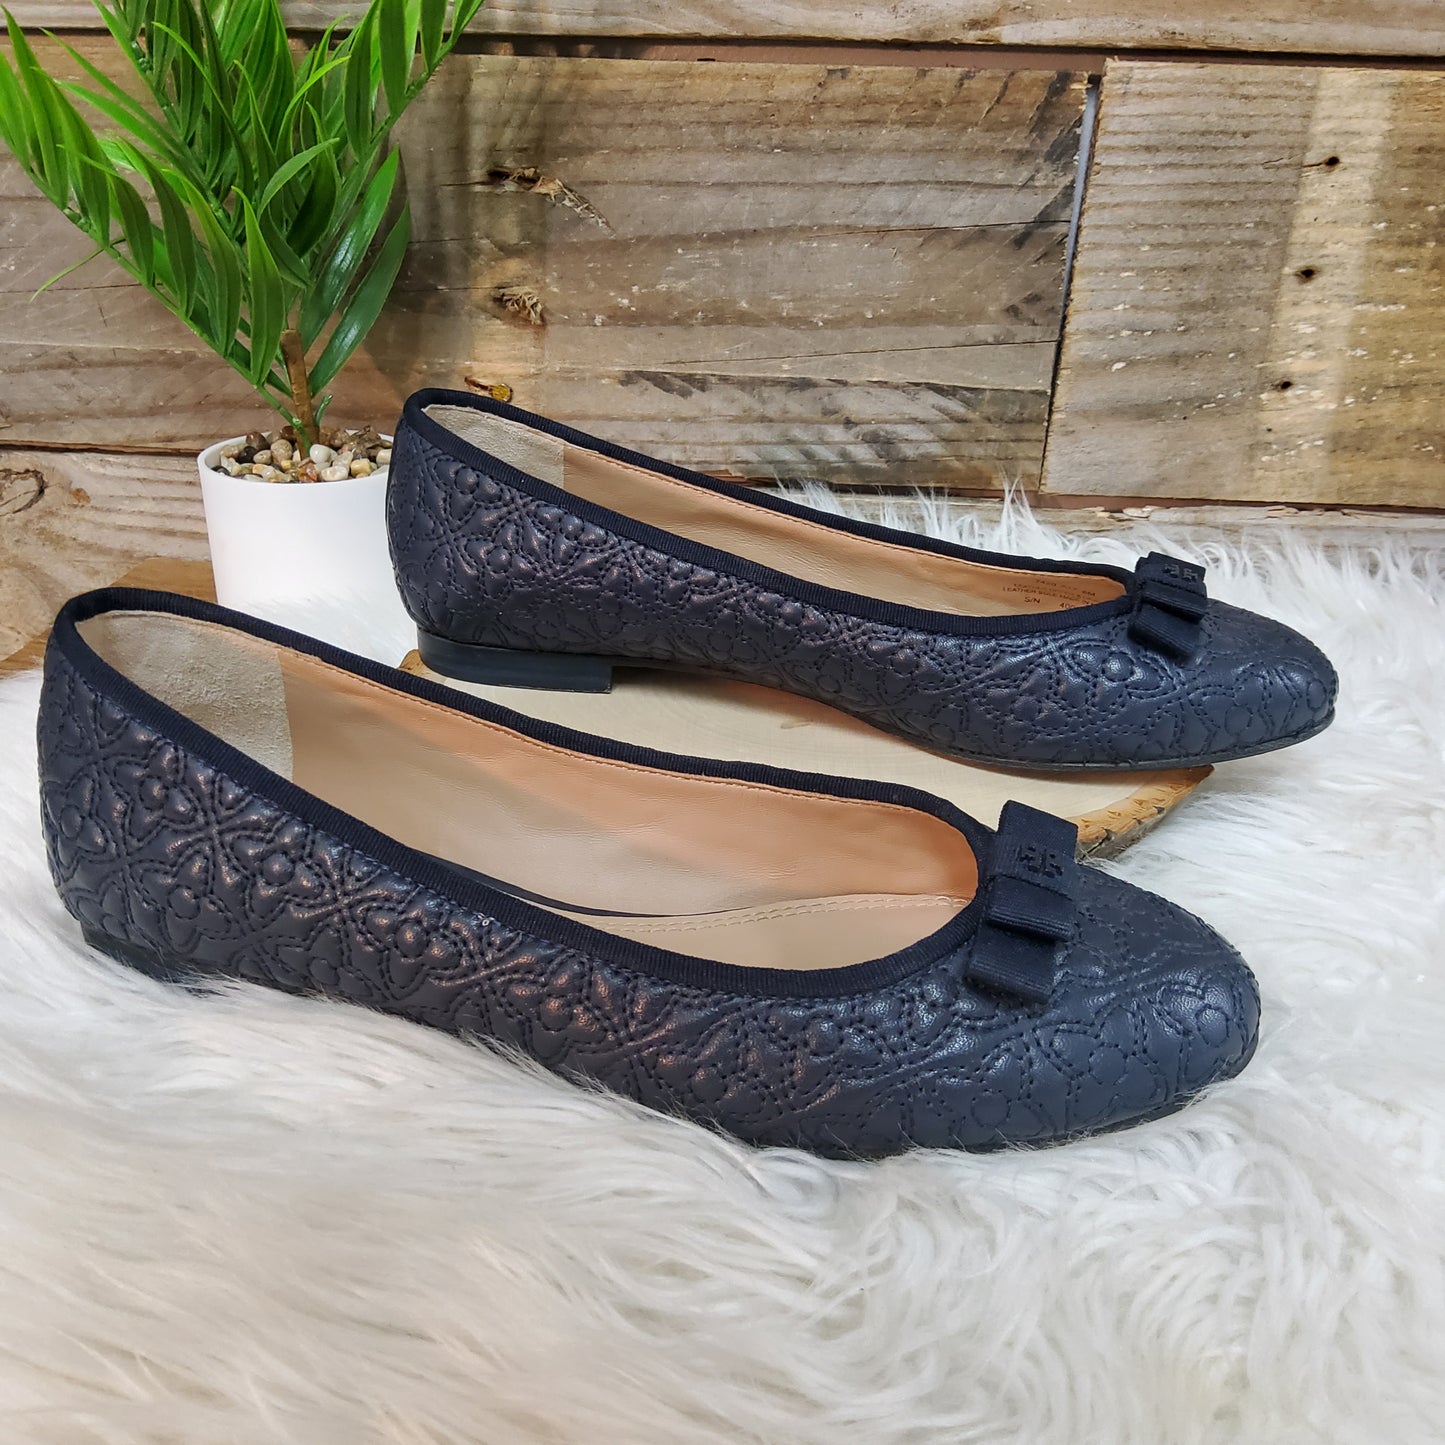 Tory Burch Quilted Navy Flats Sz 8